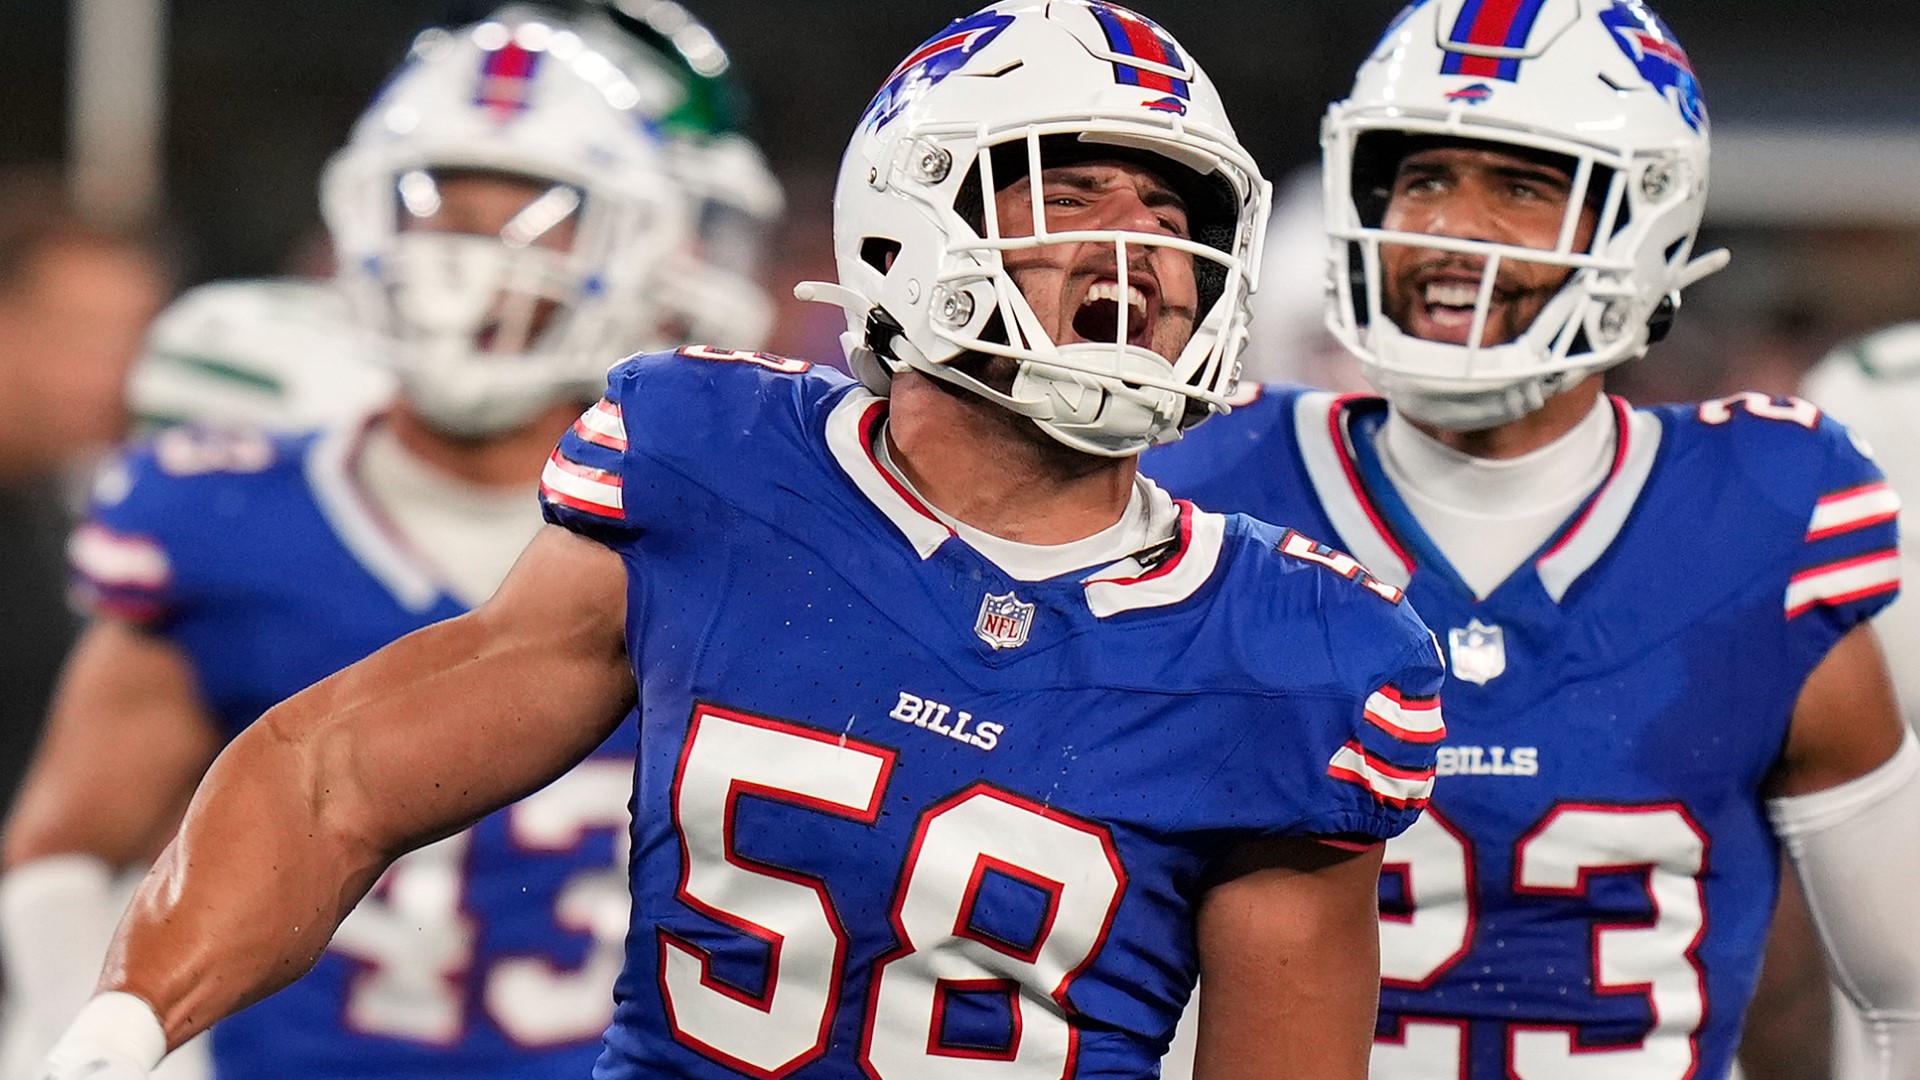 Channel 2 Sports Reporter Jonathan Acosta and WGRZ Bills/NFL Insider Vic Carucci look ahead to the Bills’ Week 3 game against the Washington Commanders.